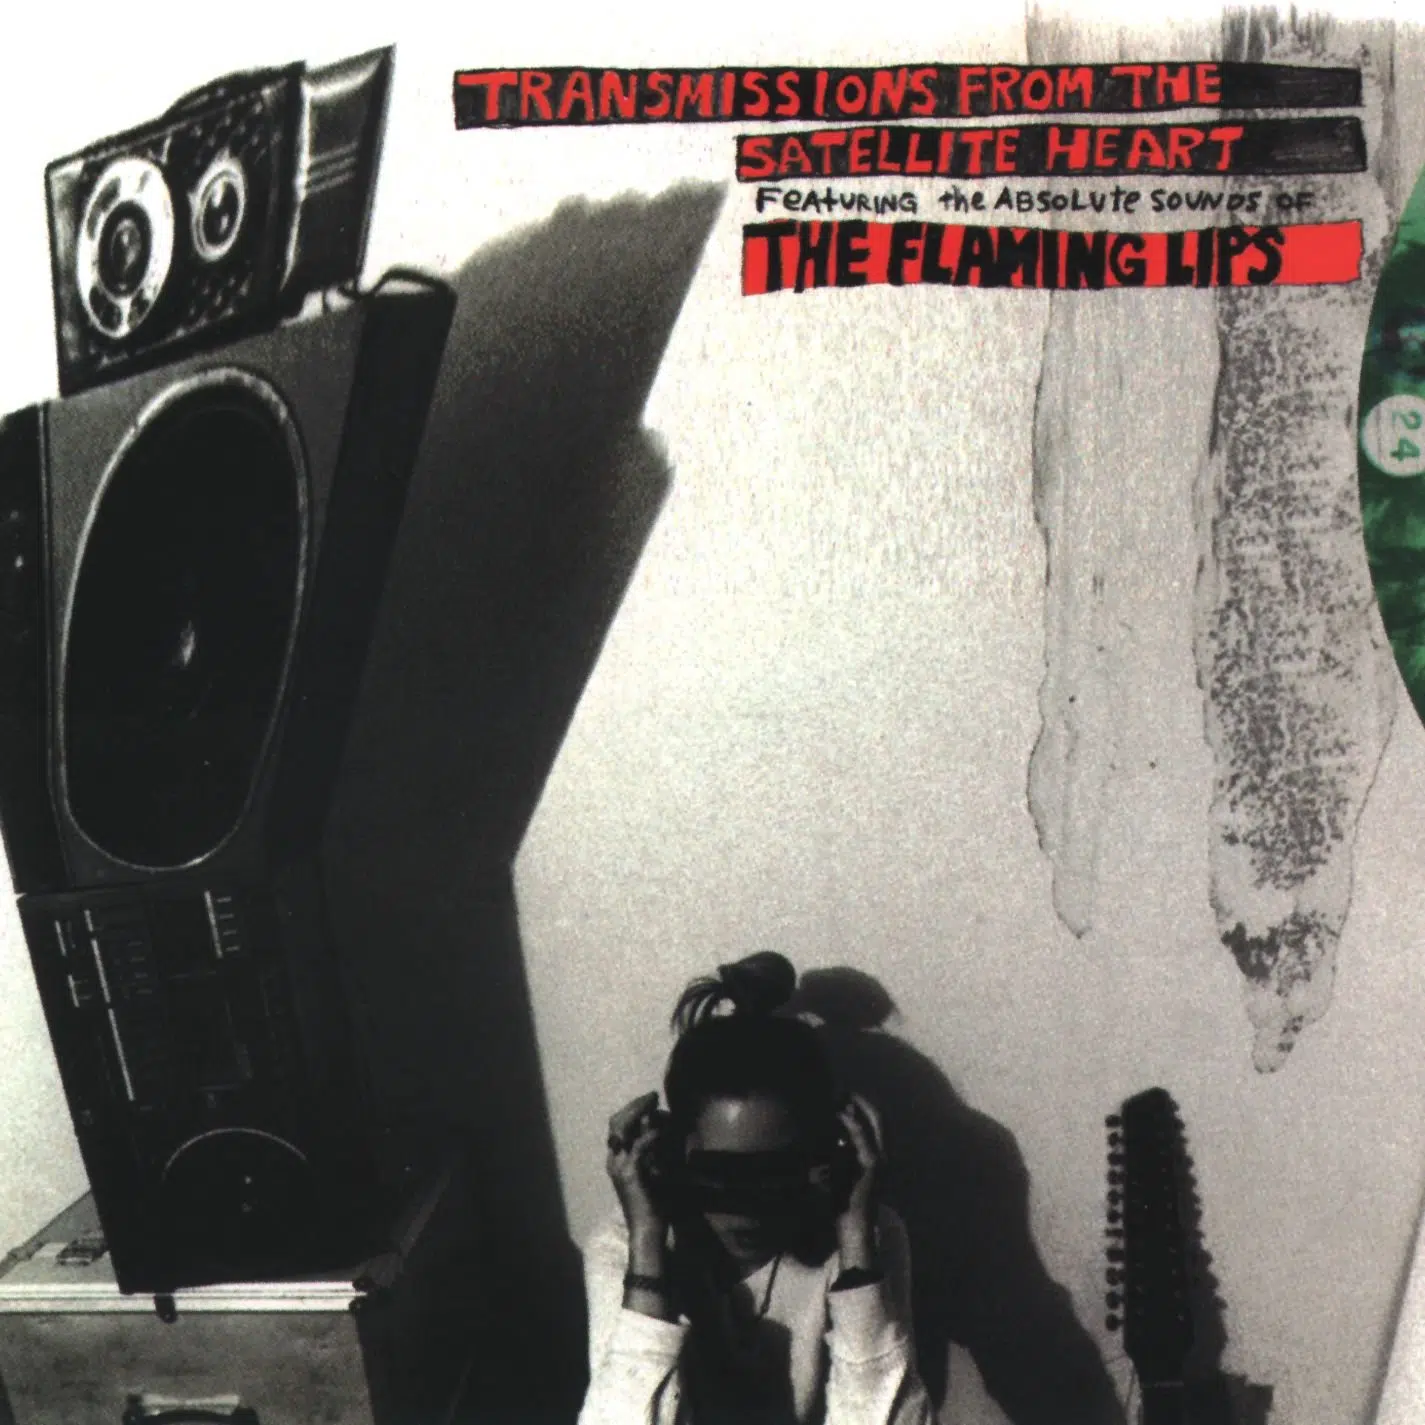 The Flaming Lips Transmissions from the Satellite Heart